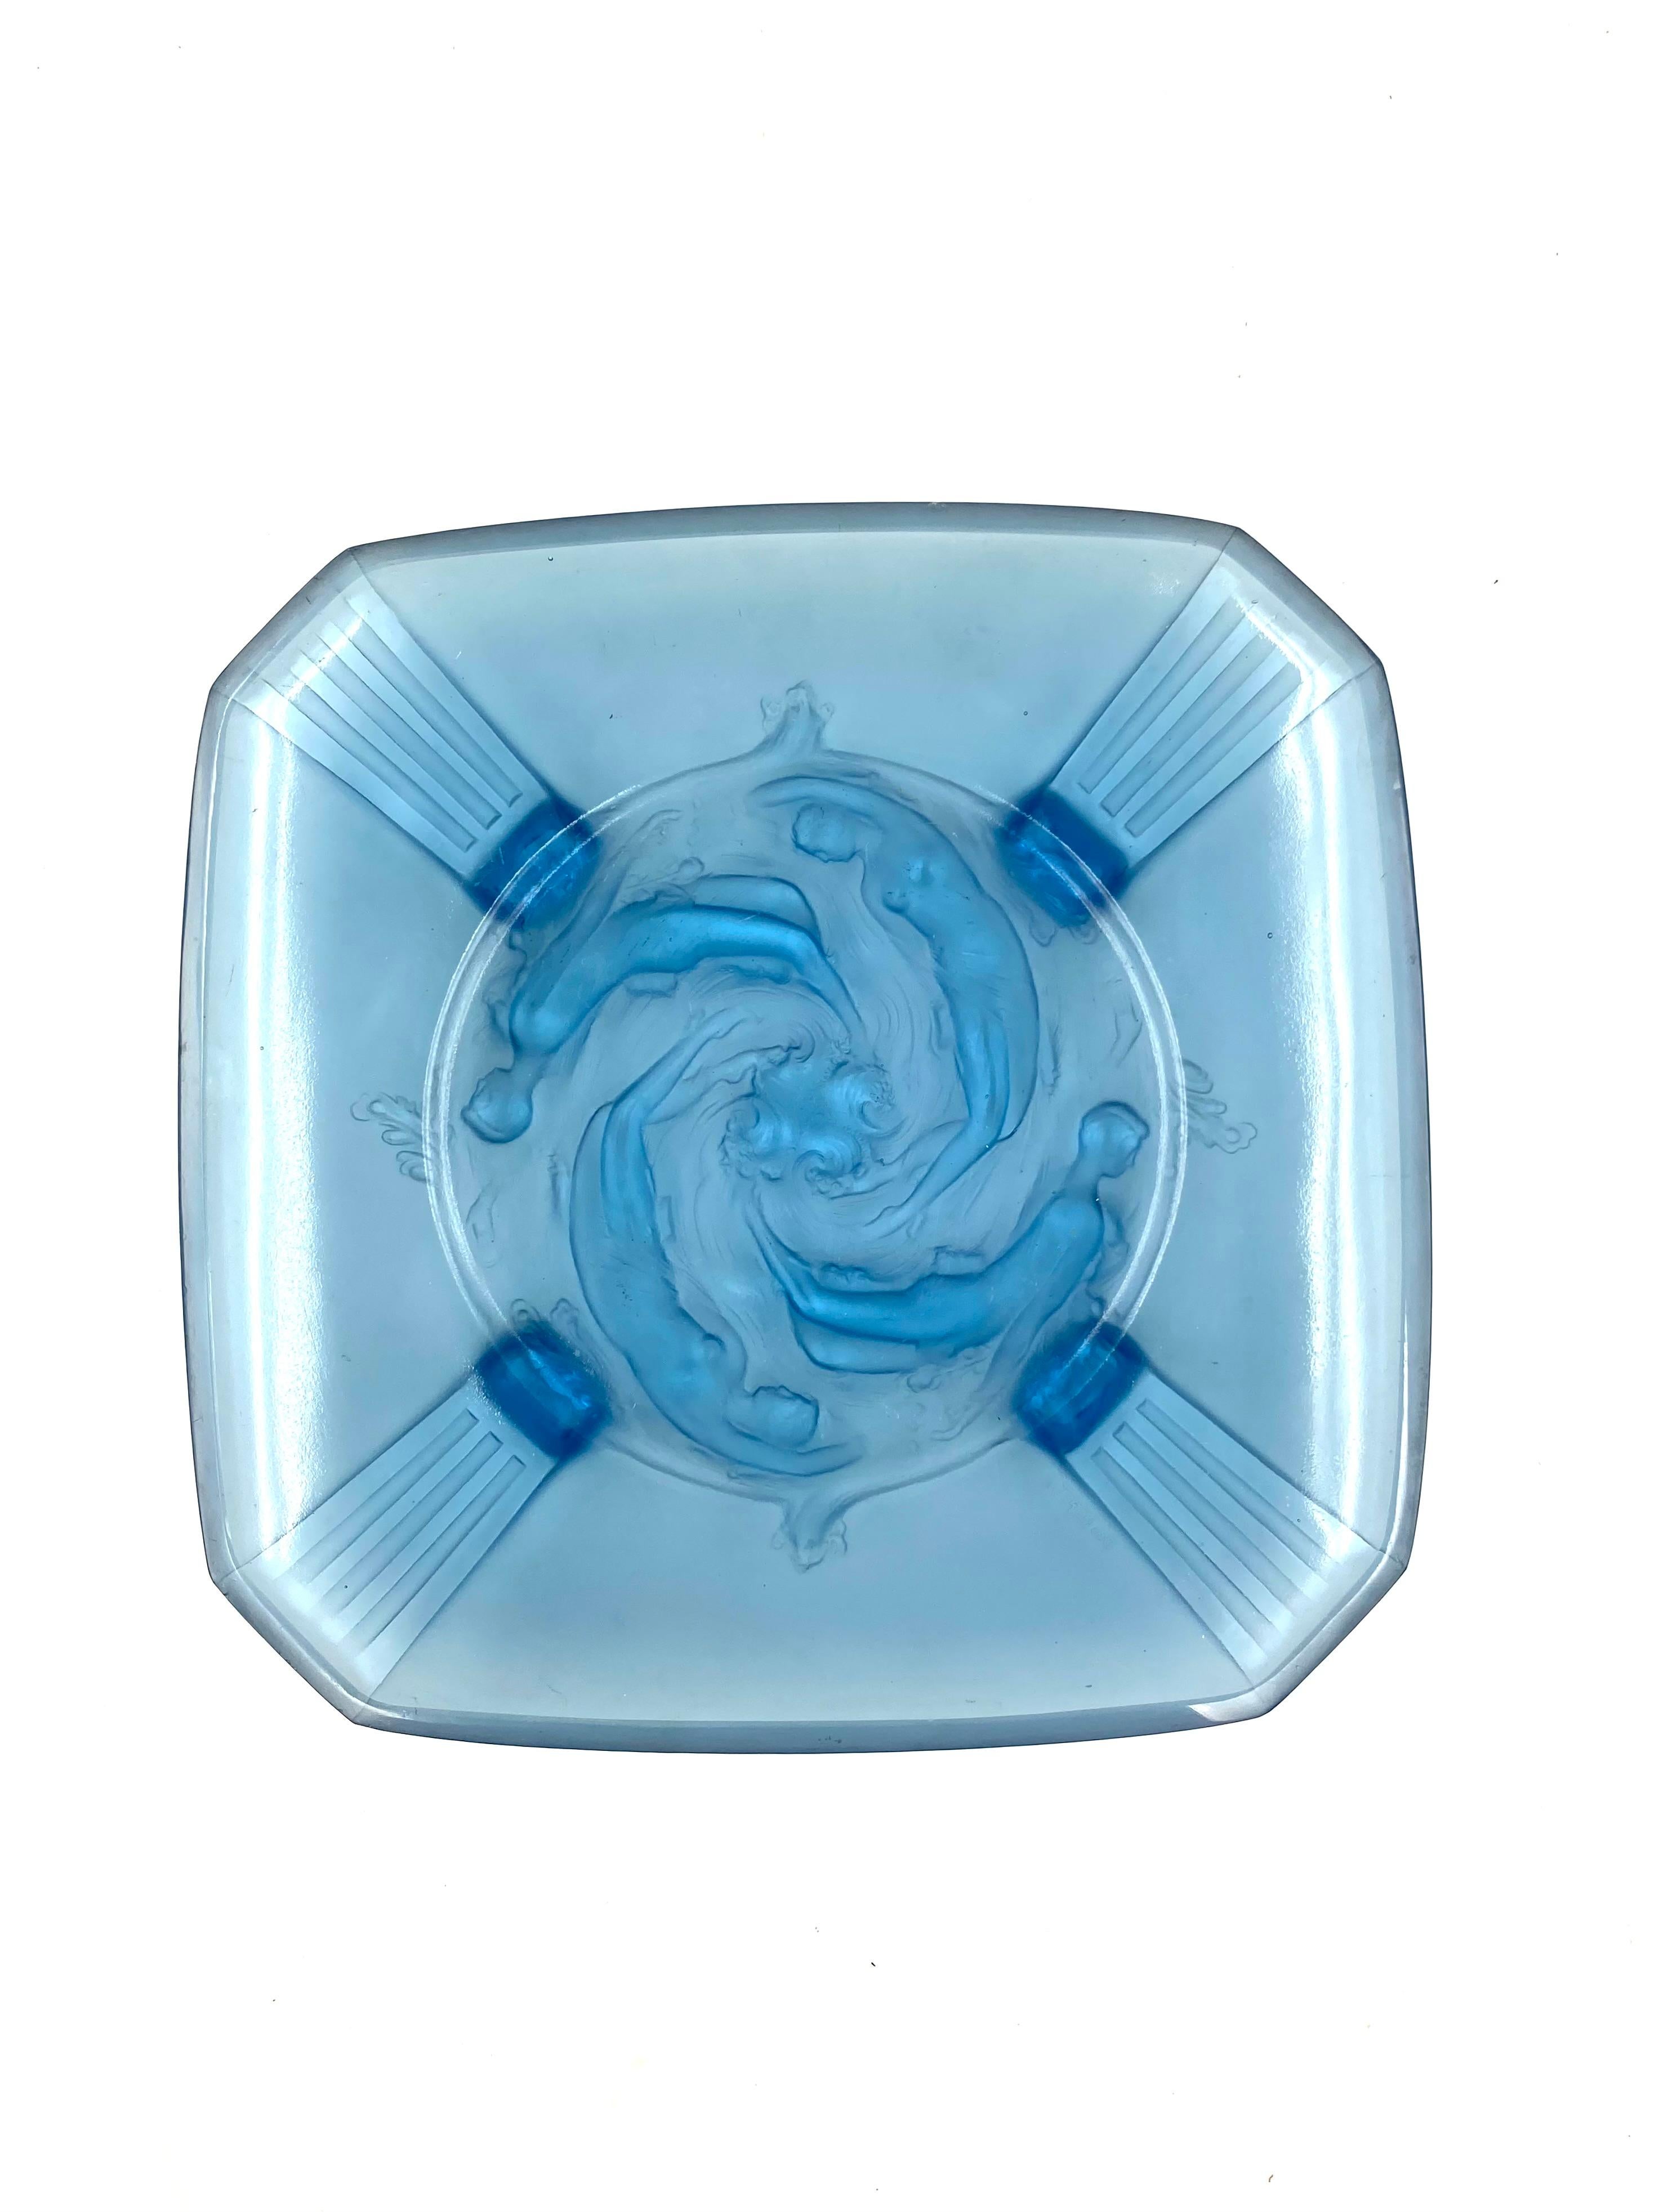 Important pressed moulded glass bowl / tray. Octagonal shape with Naiads decoration.

Verrieres Des Hanots, France, 1930s.

In Greek mythology, the naiads are a type of female spirit, or nymph, presiding over fountains, wells, springs, streams,